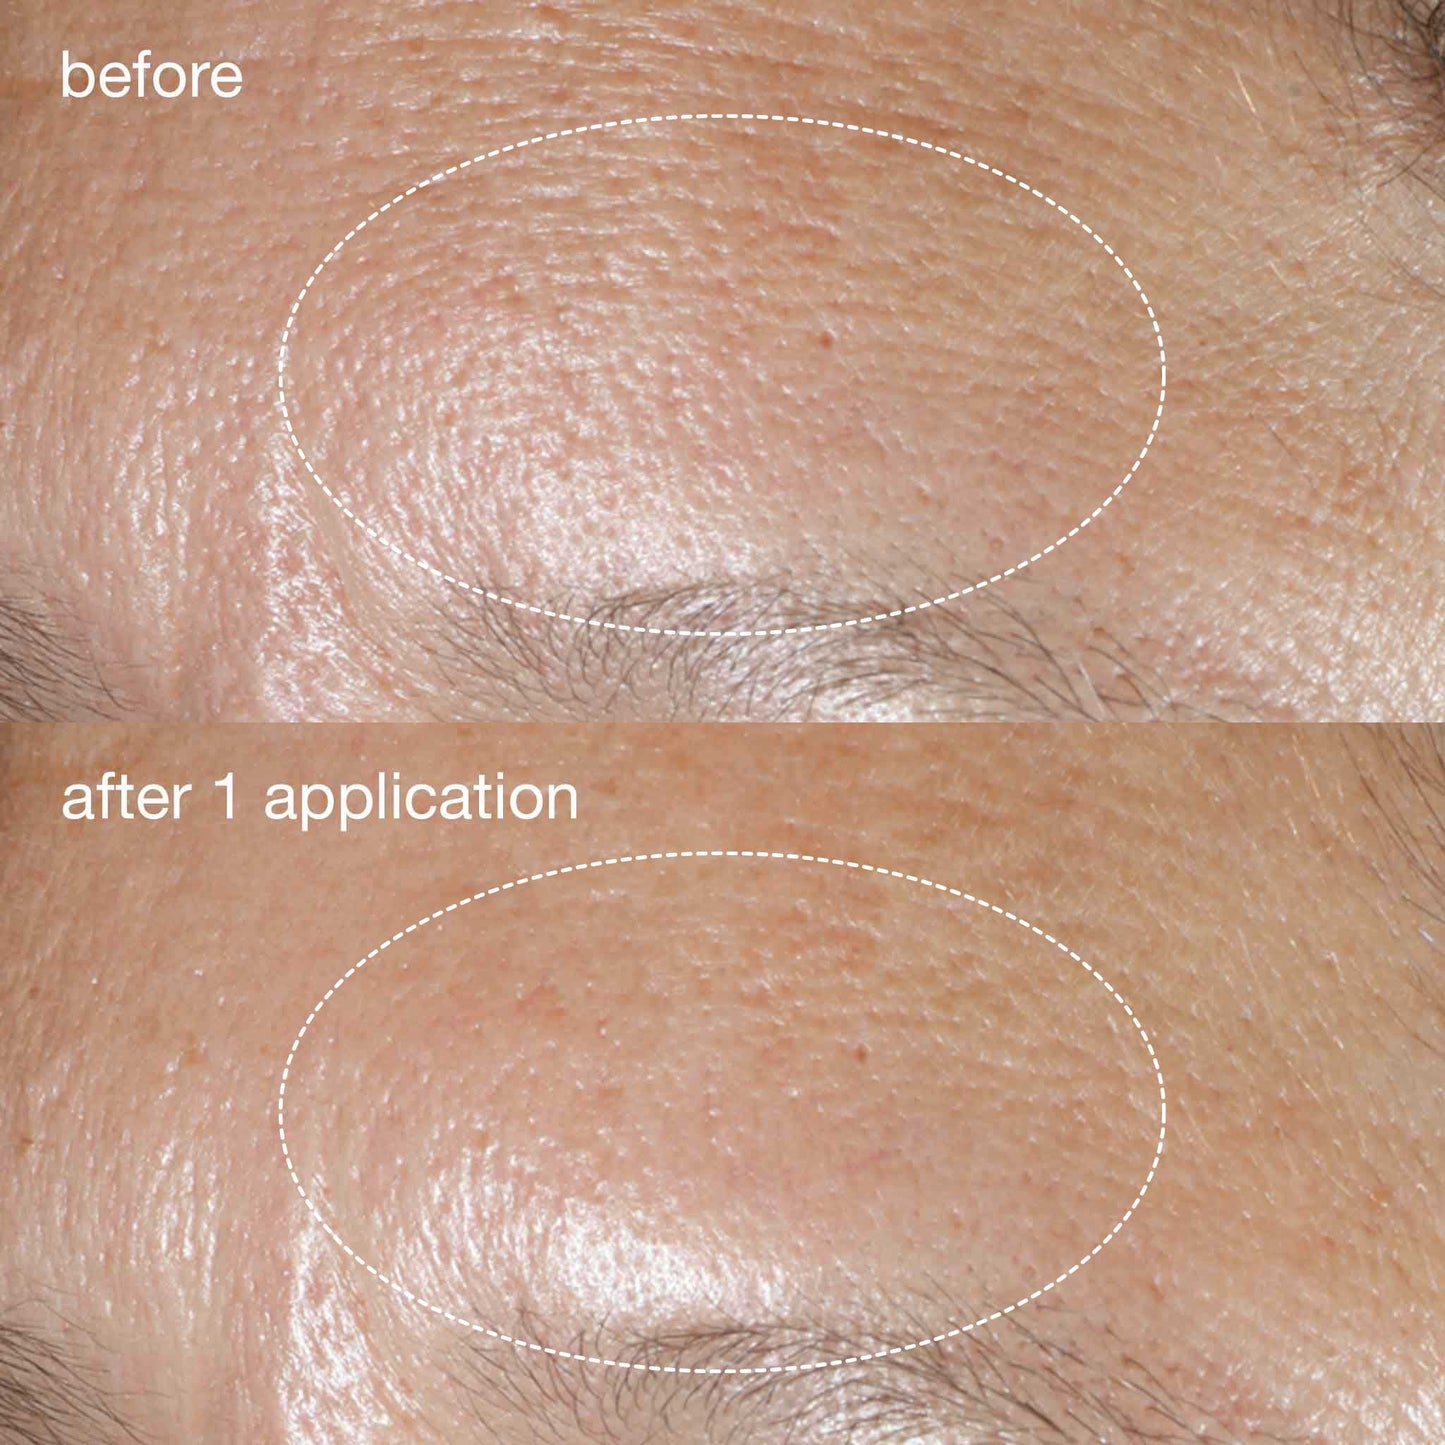 phyto nature oxygen cream before and after  1 application